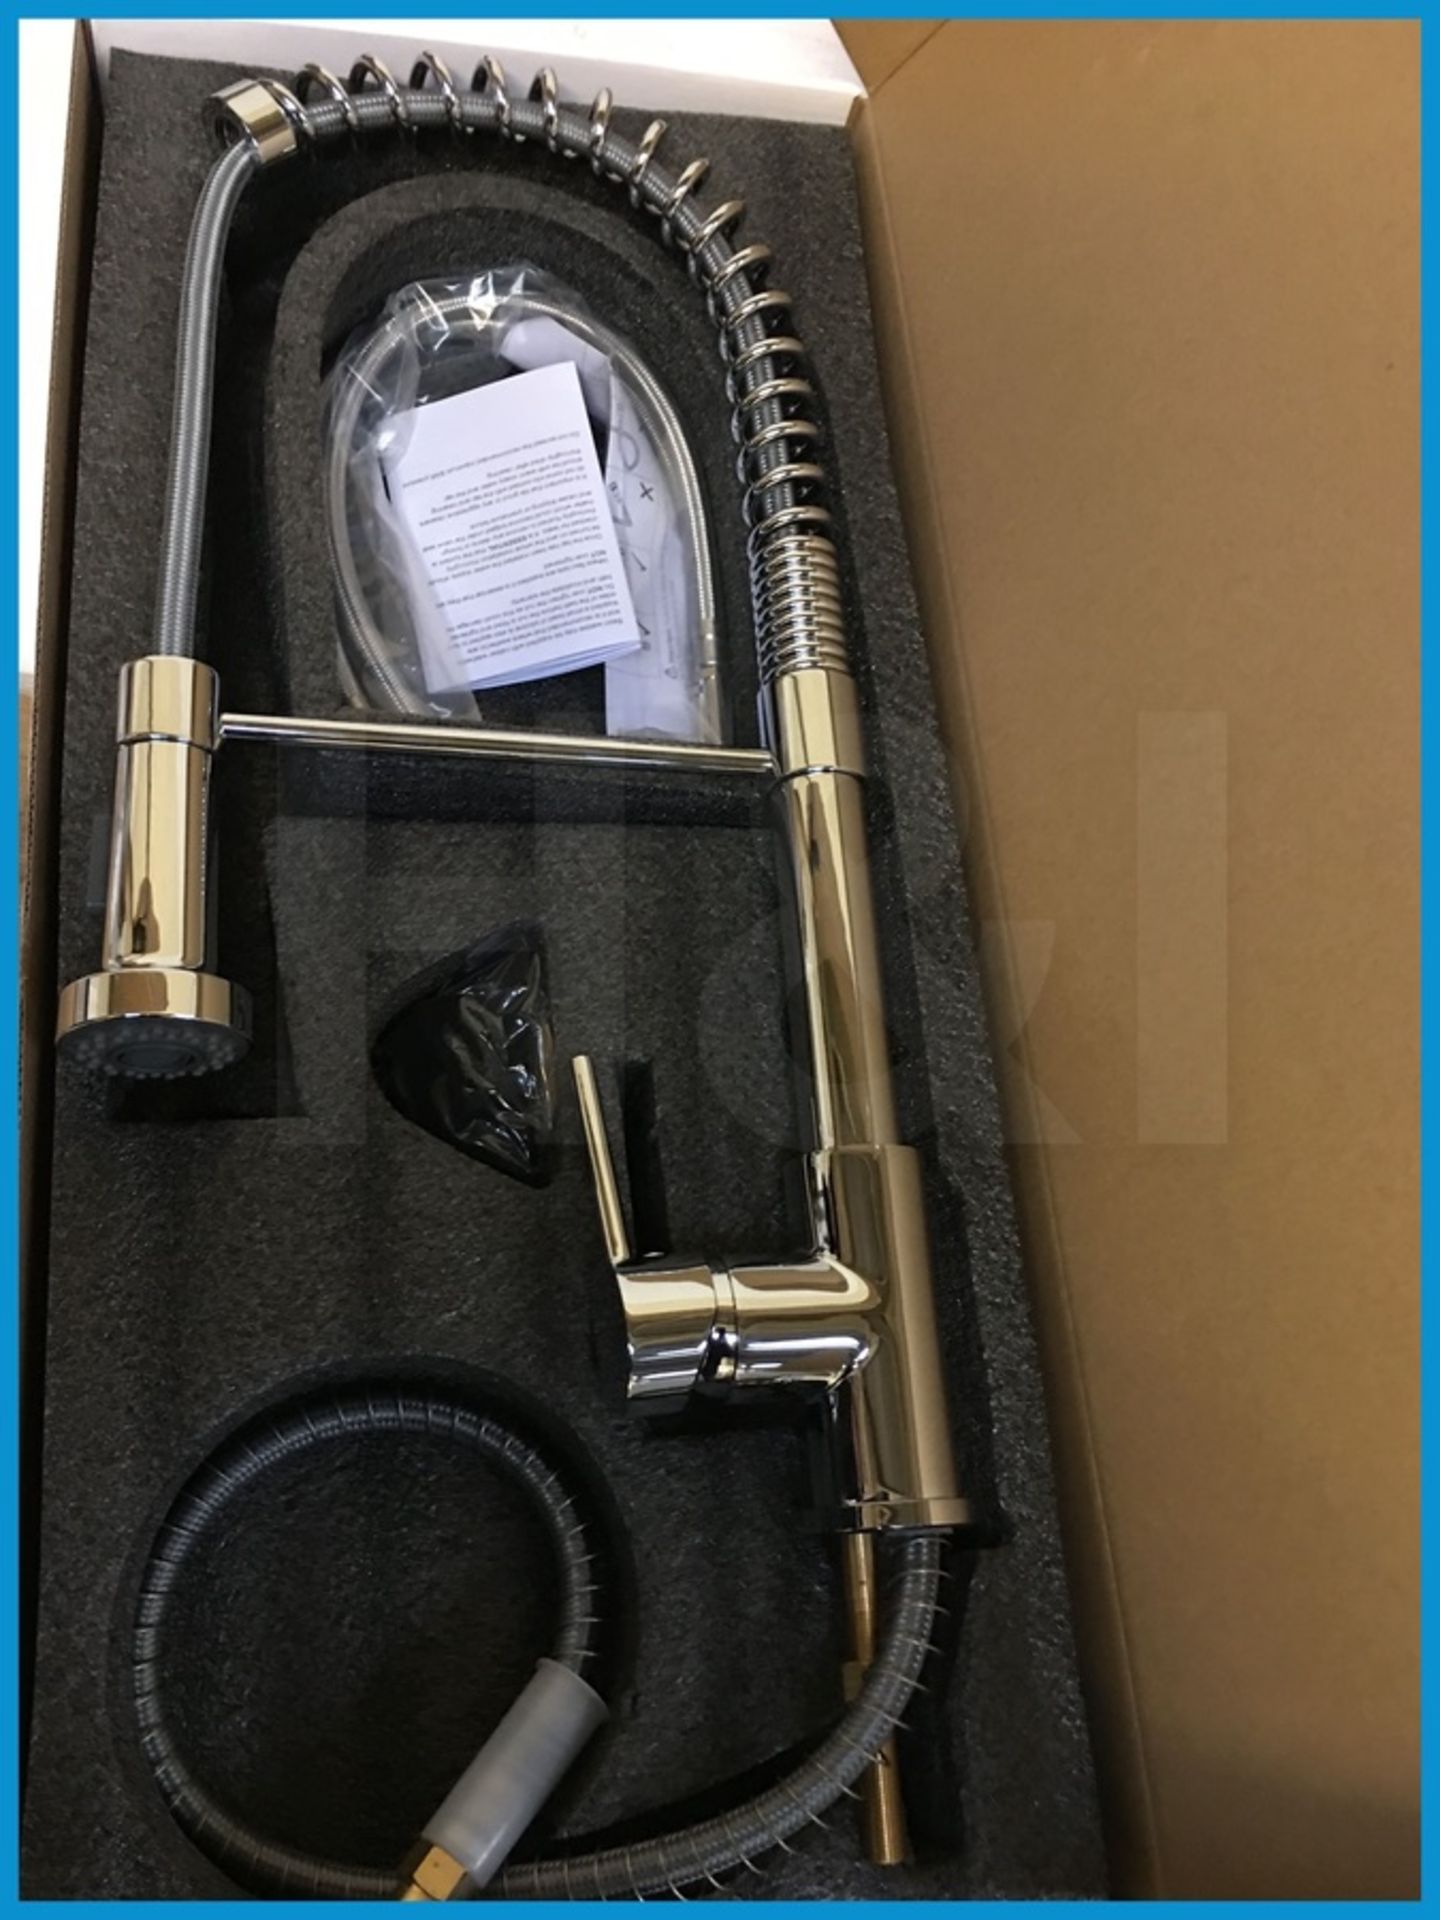 Stunning designer sprung neck kitchen mixer tap with pull down spray head in polished chrome finish. - Image 2 of 10